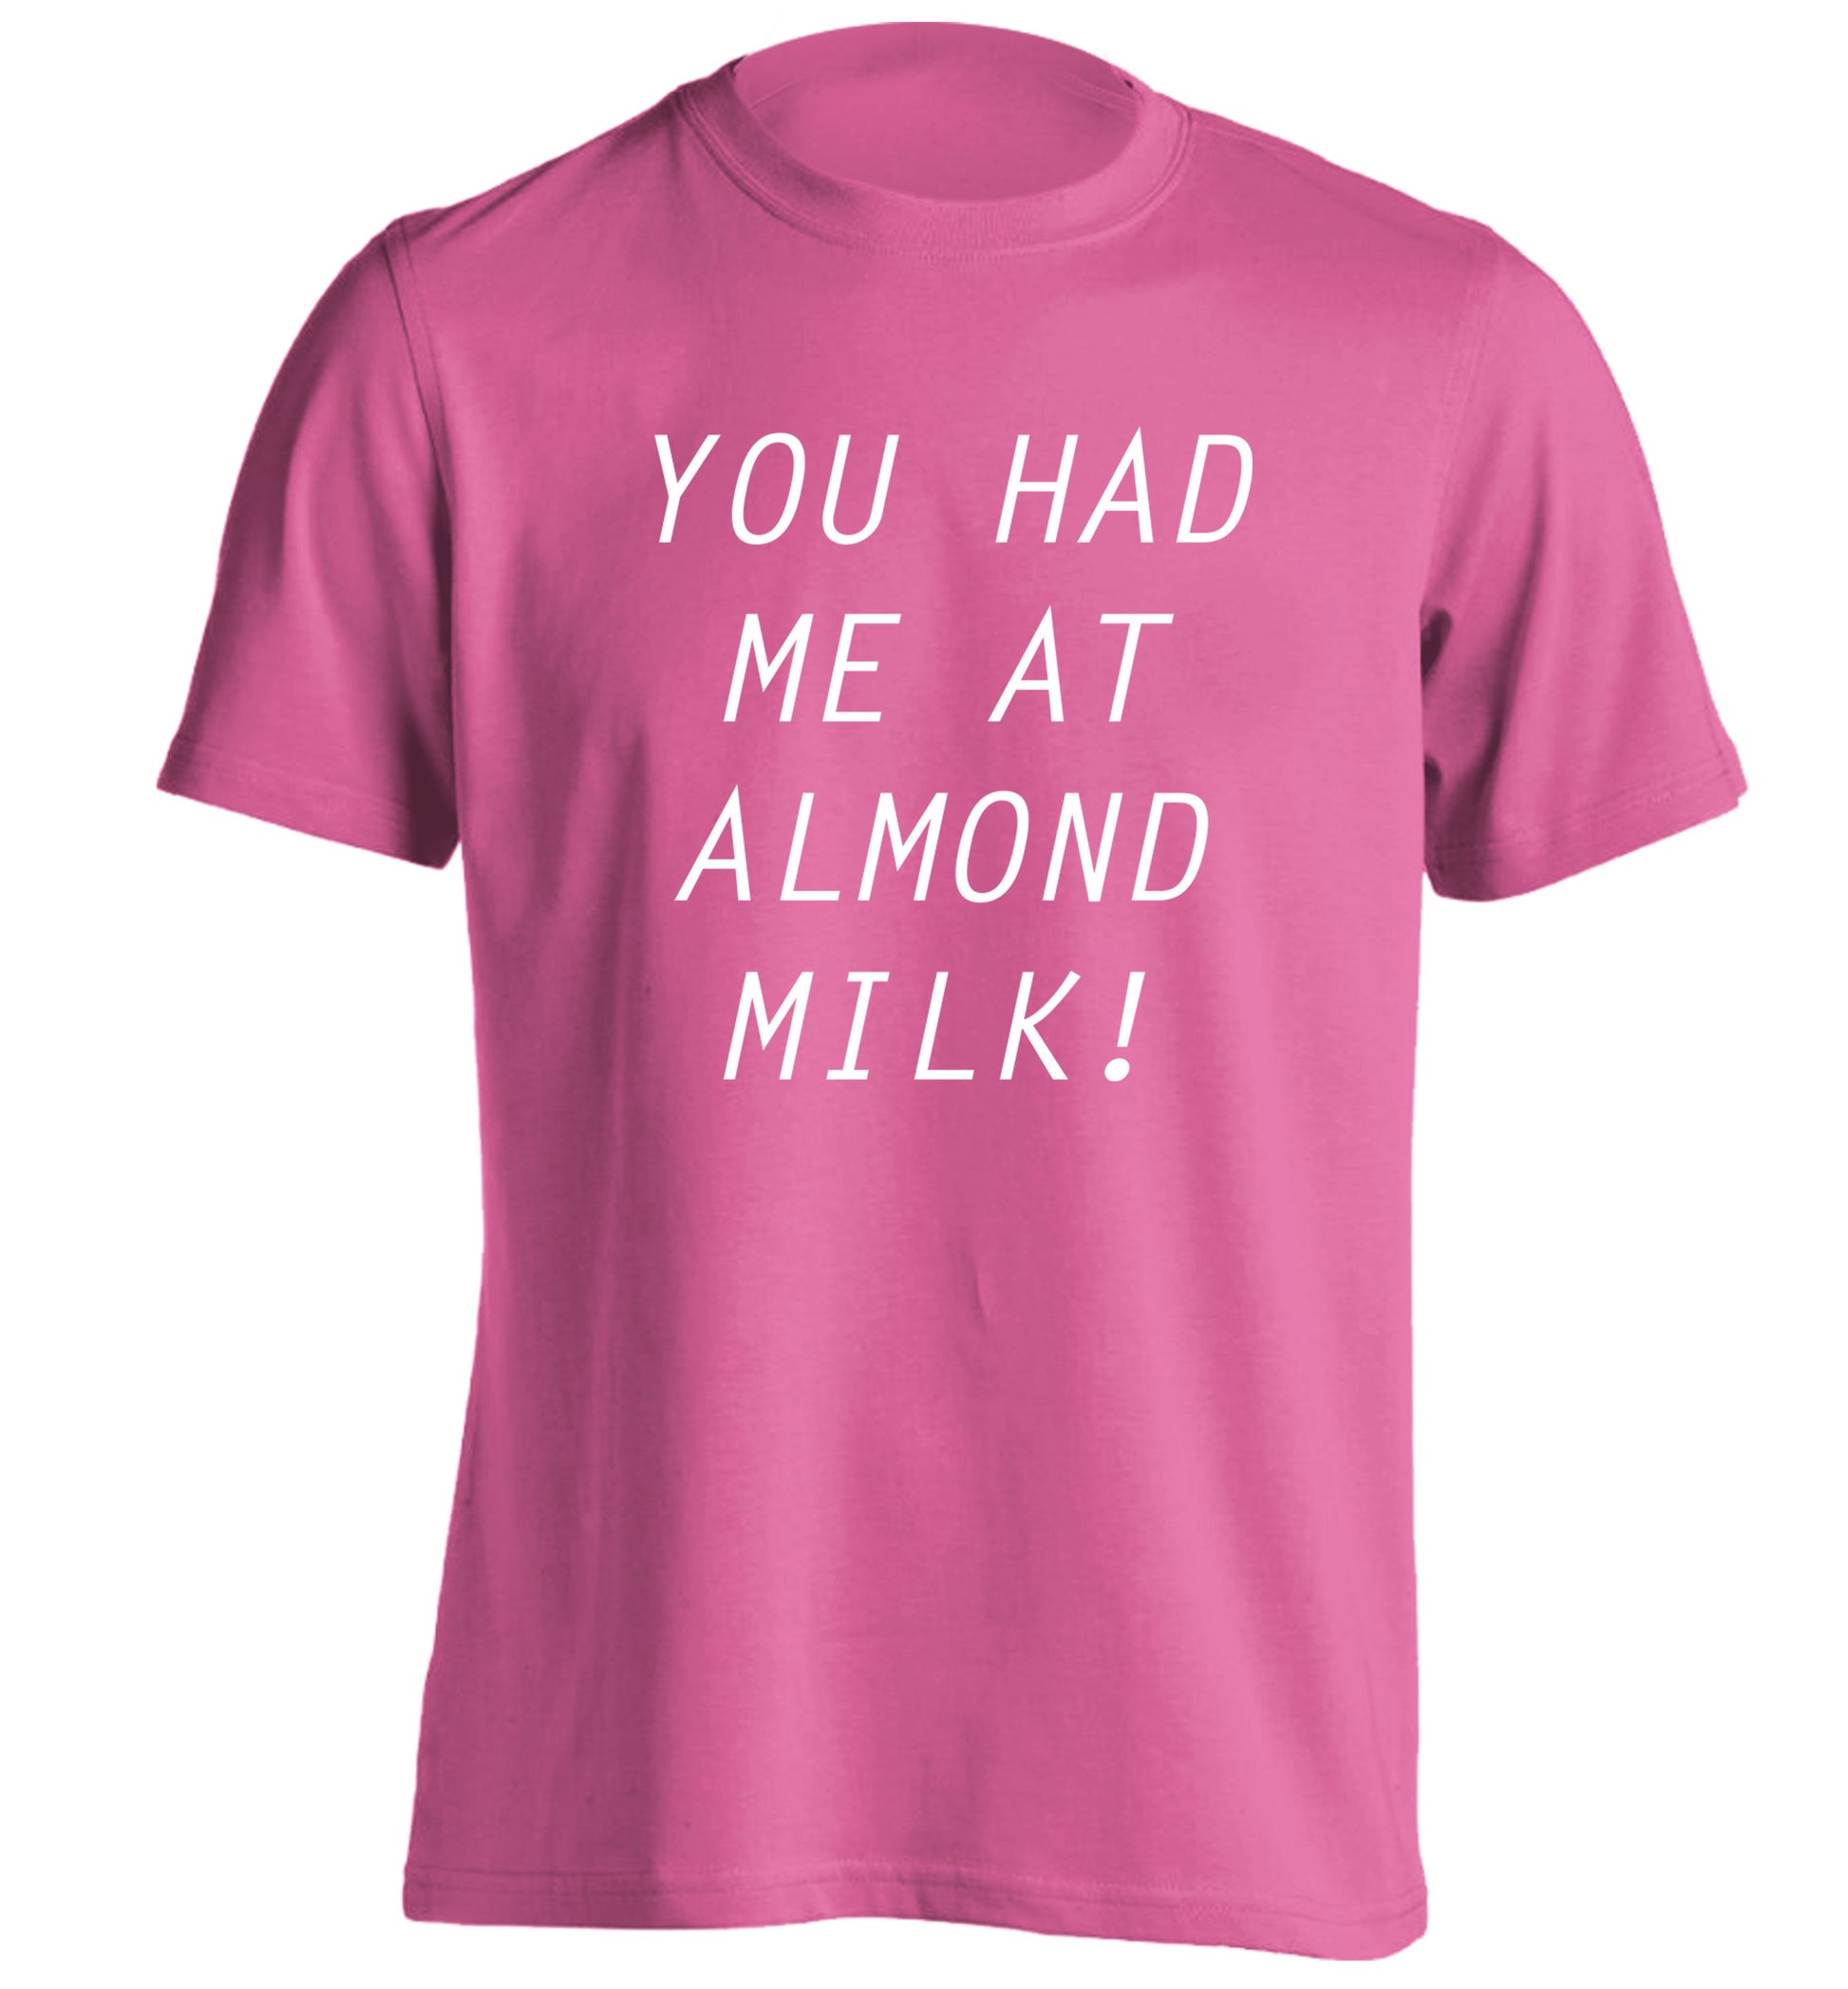 You had me at almond milk adults unisex pink Tshirt 2XL